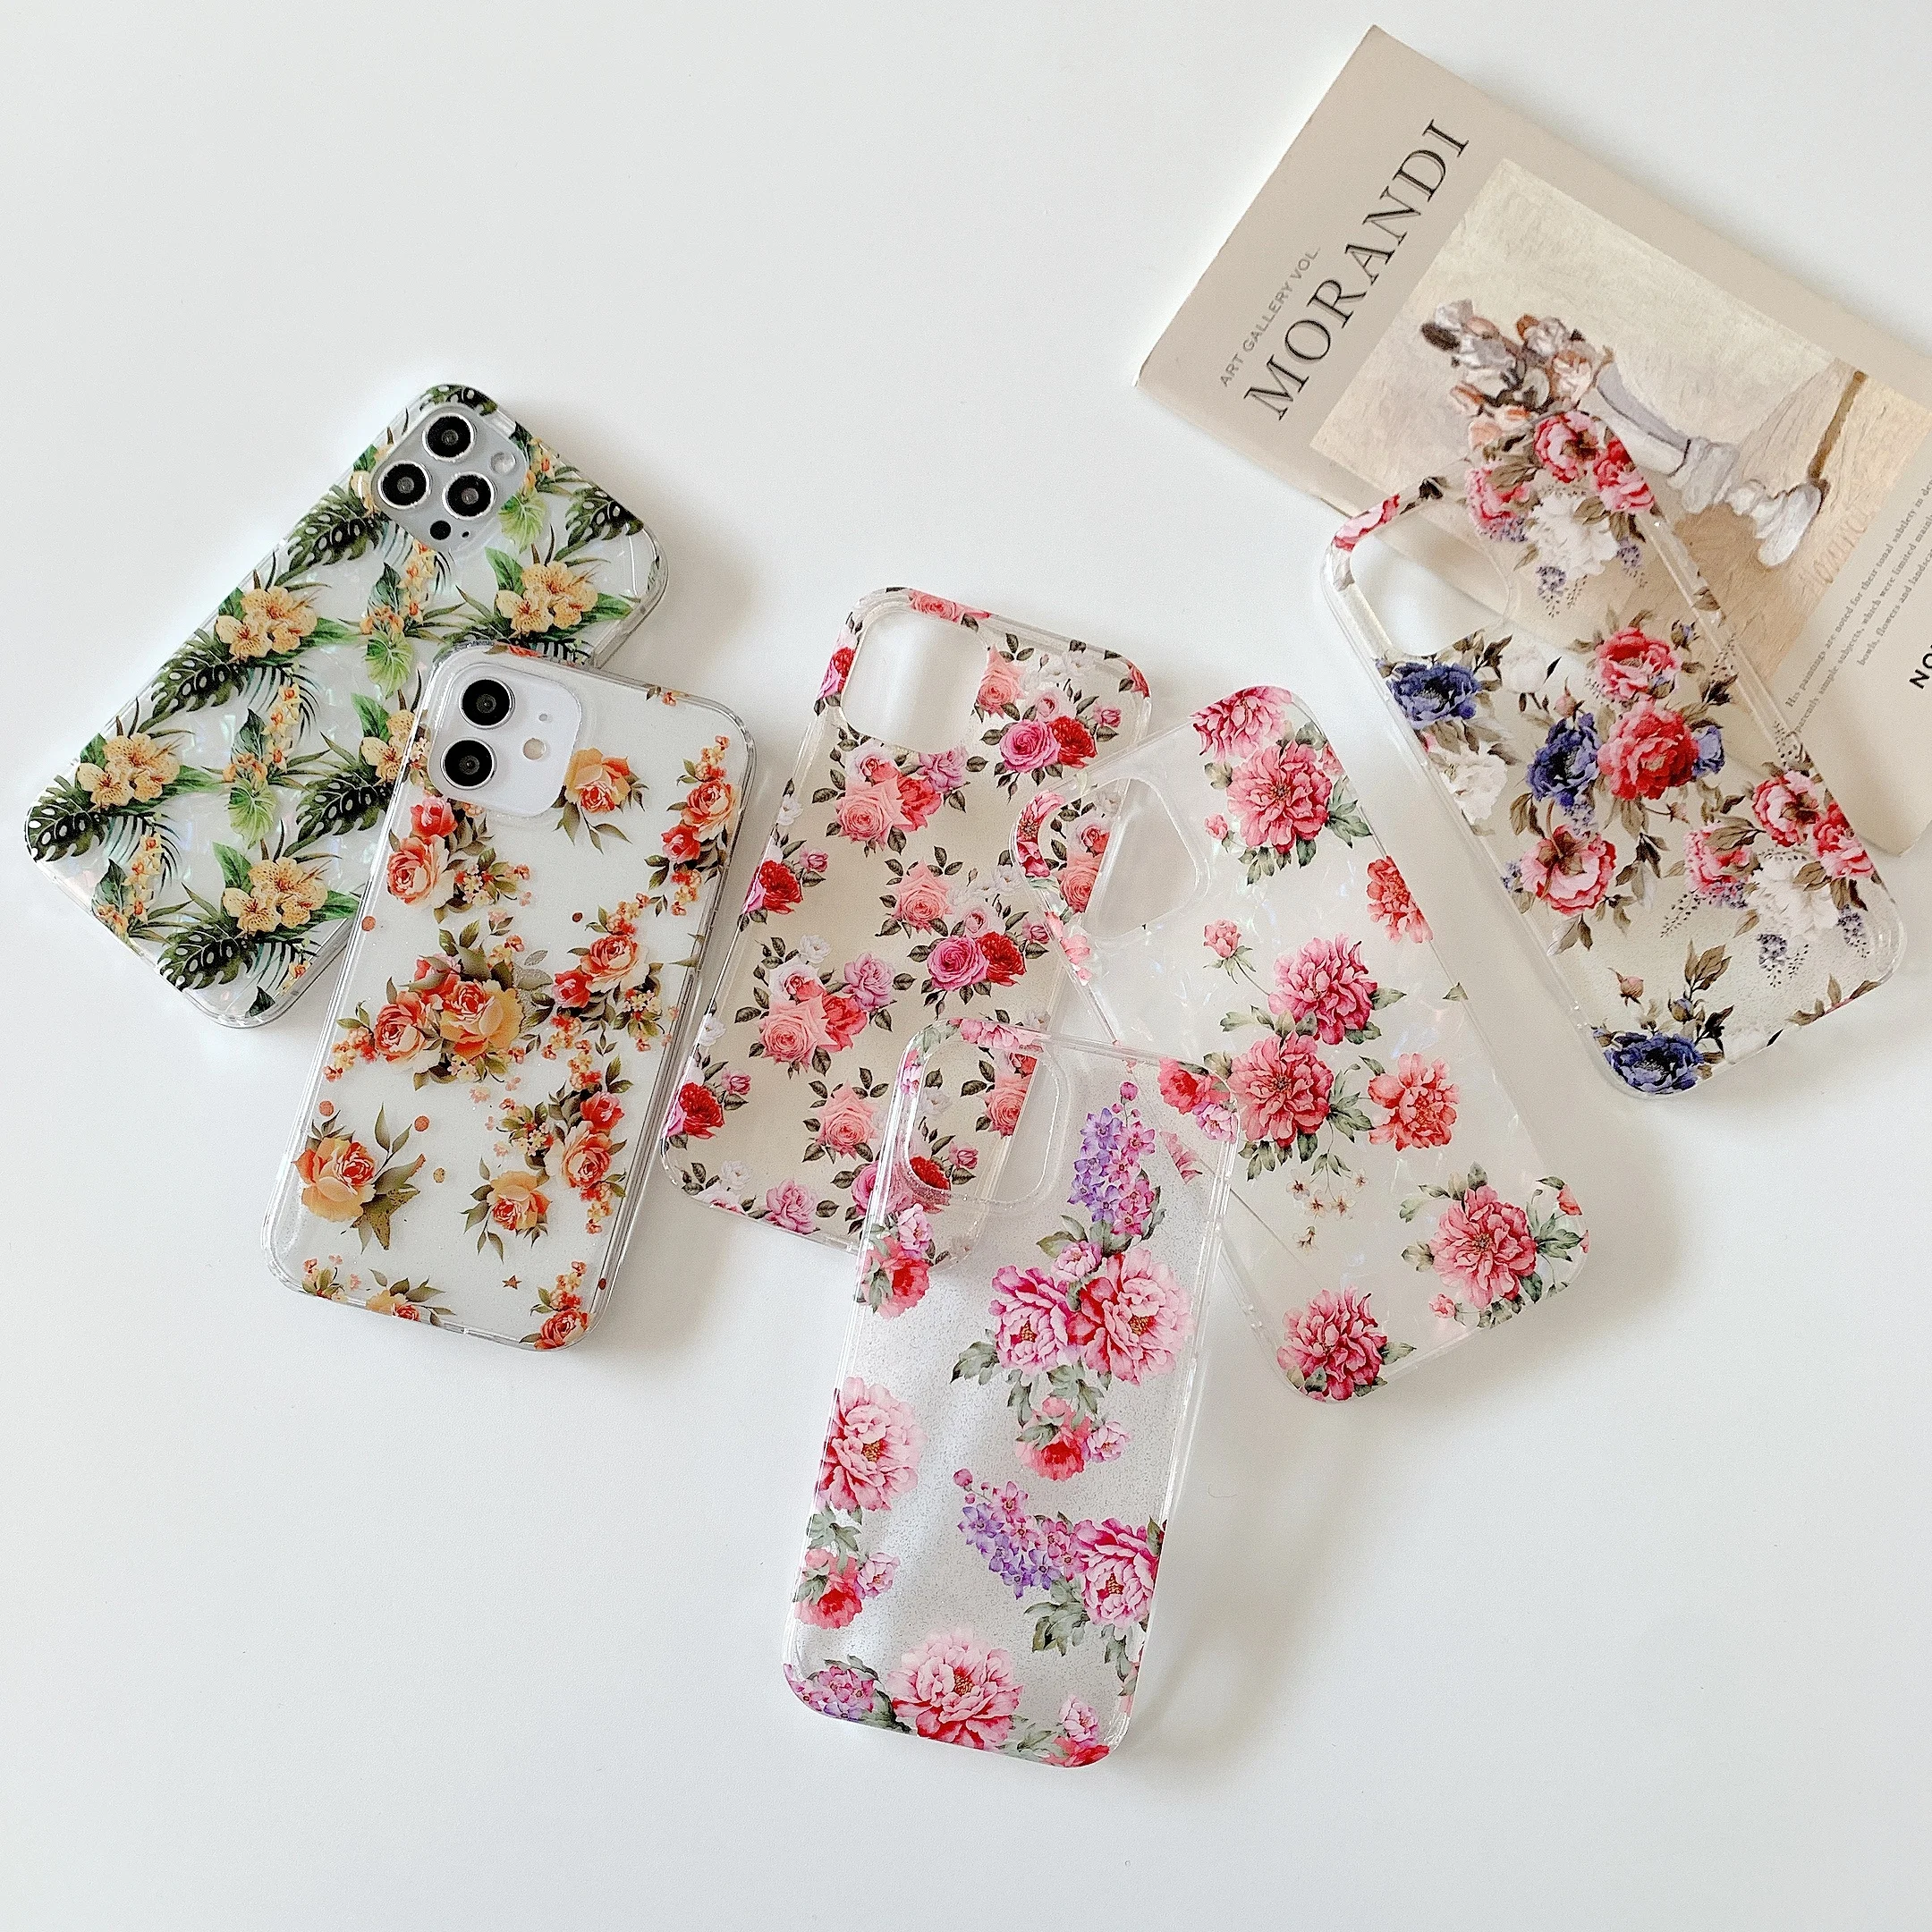 

Clear Flower Pattern Design Soft Flexible TPU Shockproof Transparent Floral IMD Phone Cover Case for iPhone 11 12 pro max, Multi-color, can be customized